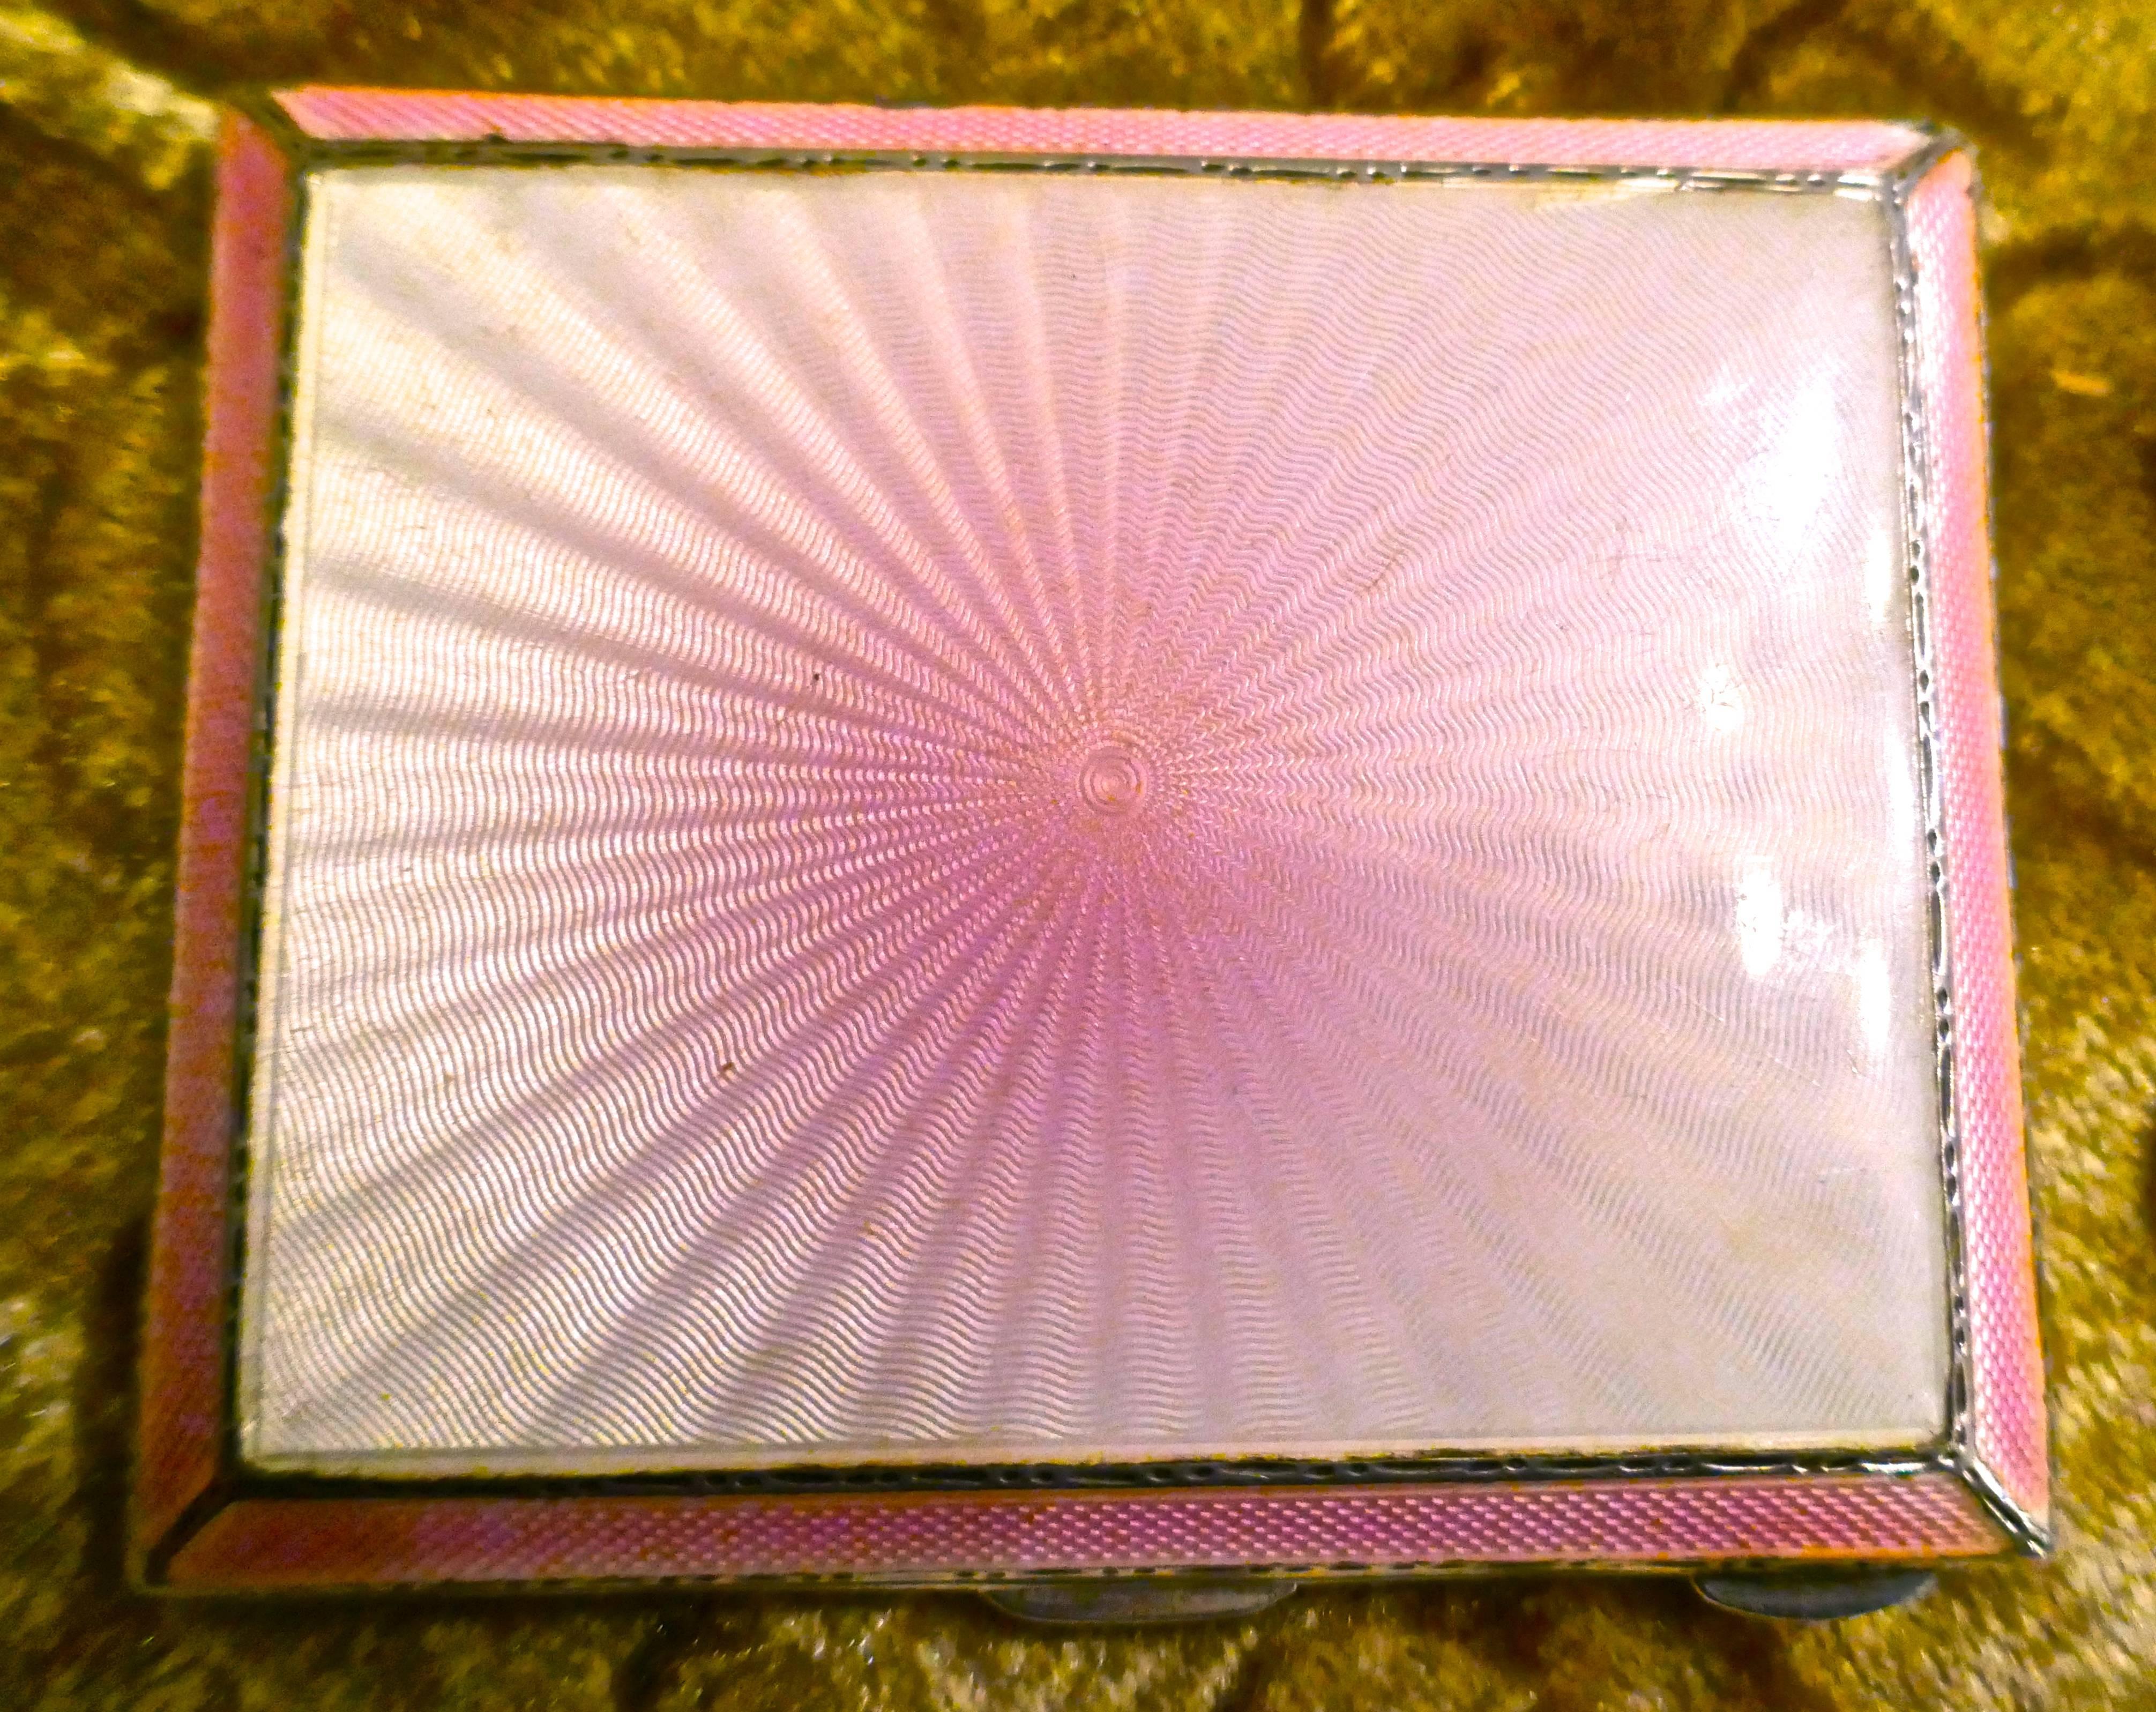 This is a very pretty piece, the rich pink of the enamel at the centre of the box fans out and pales to a rosy glow as it reaches the deep pink border
The case has a beautiful design throughout and although original use was as a cigarette case